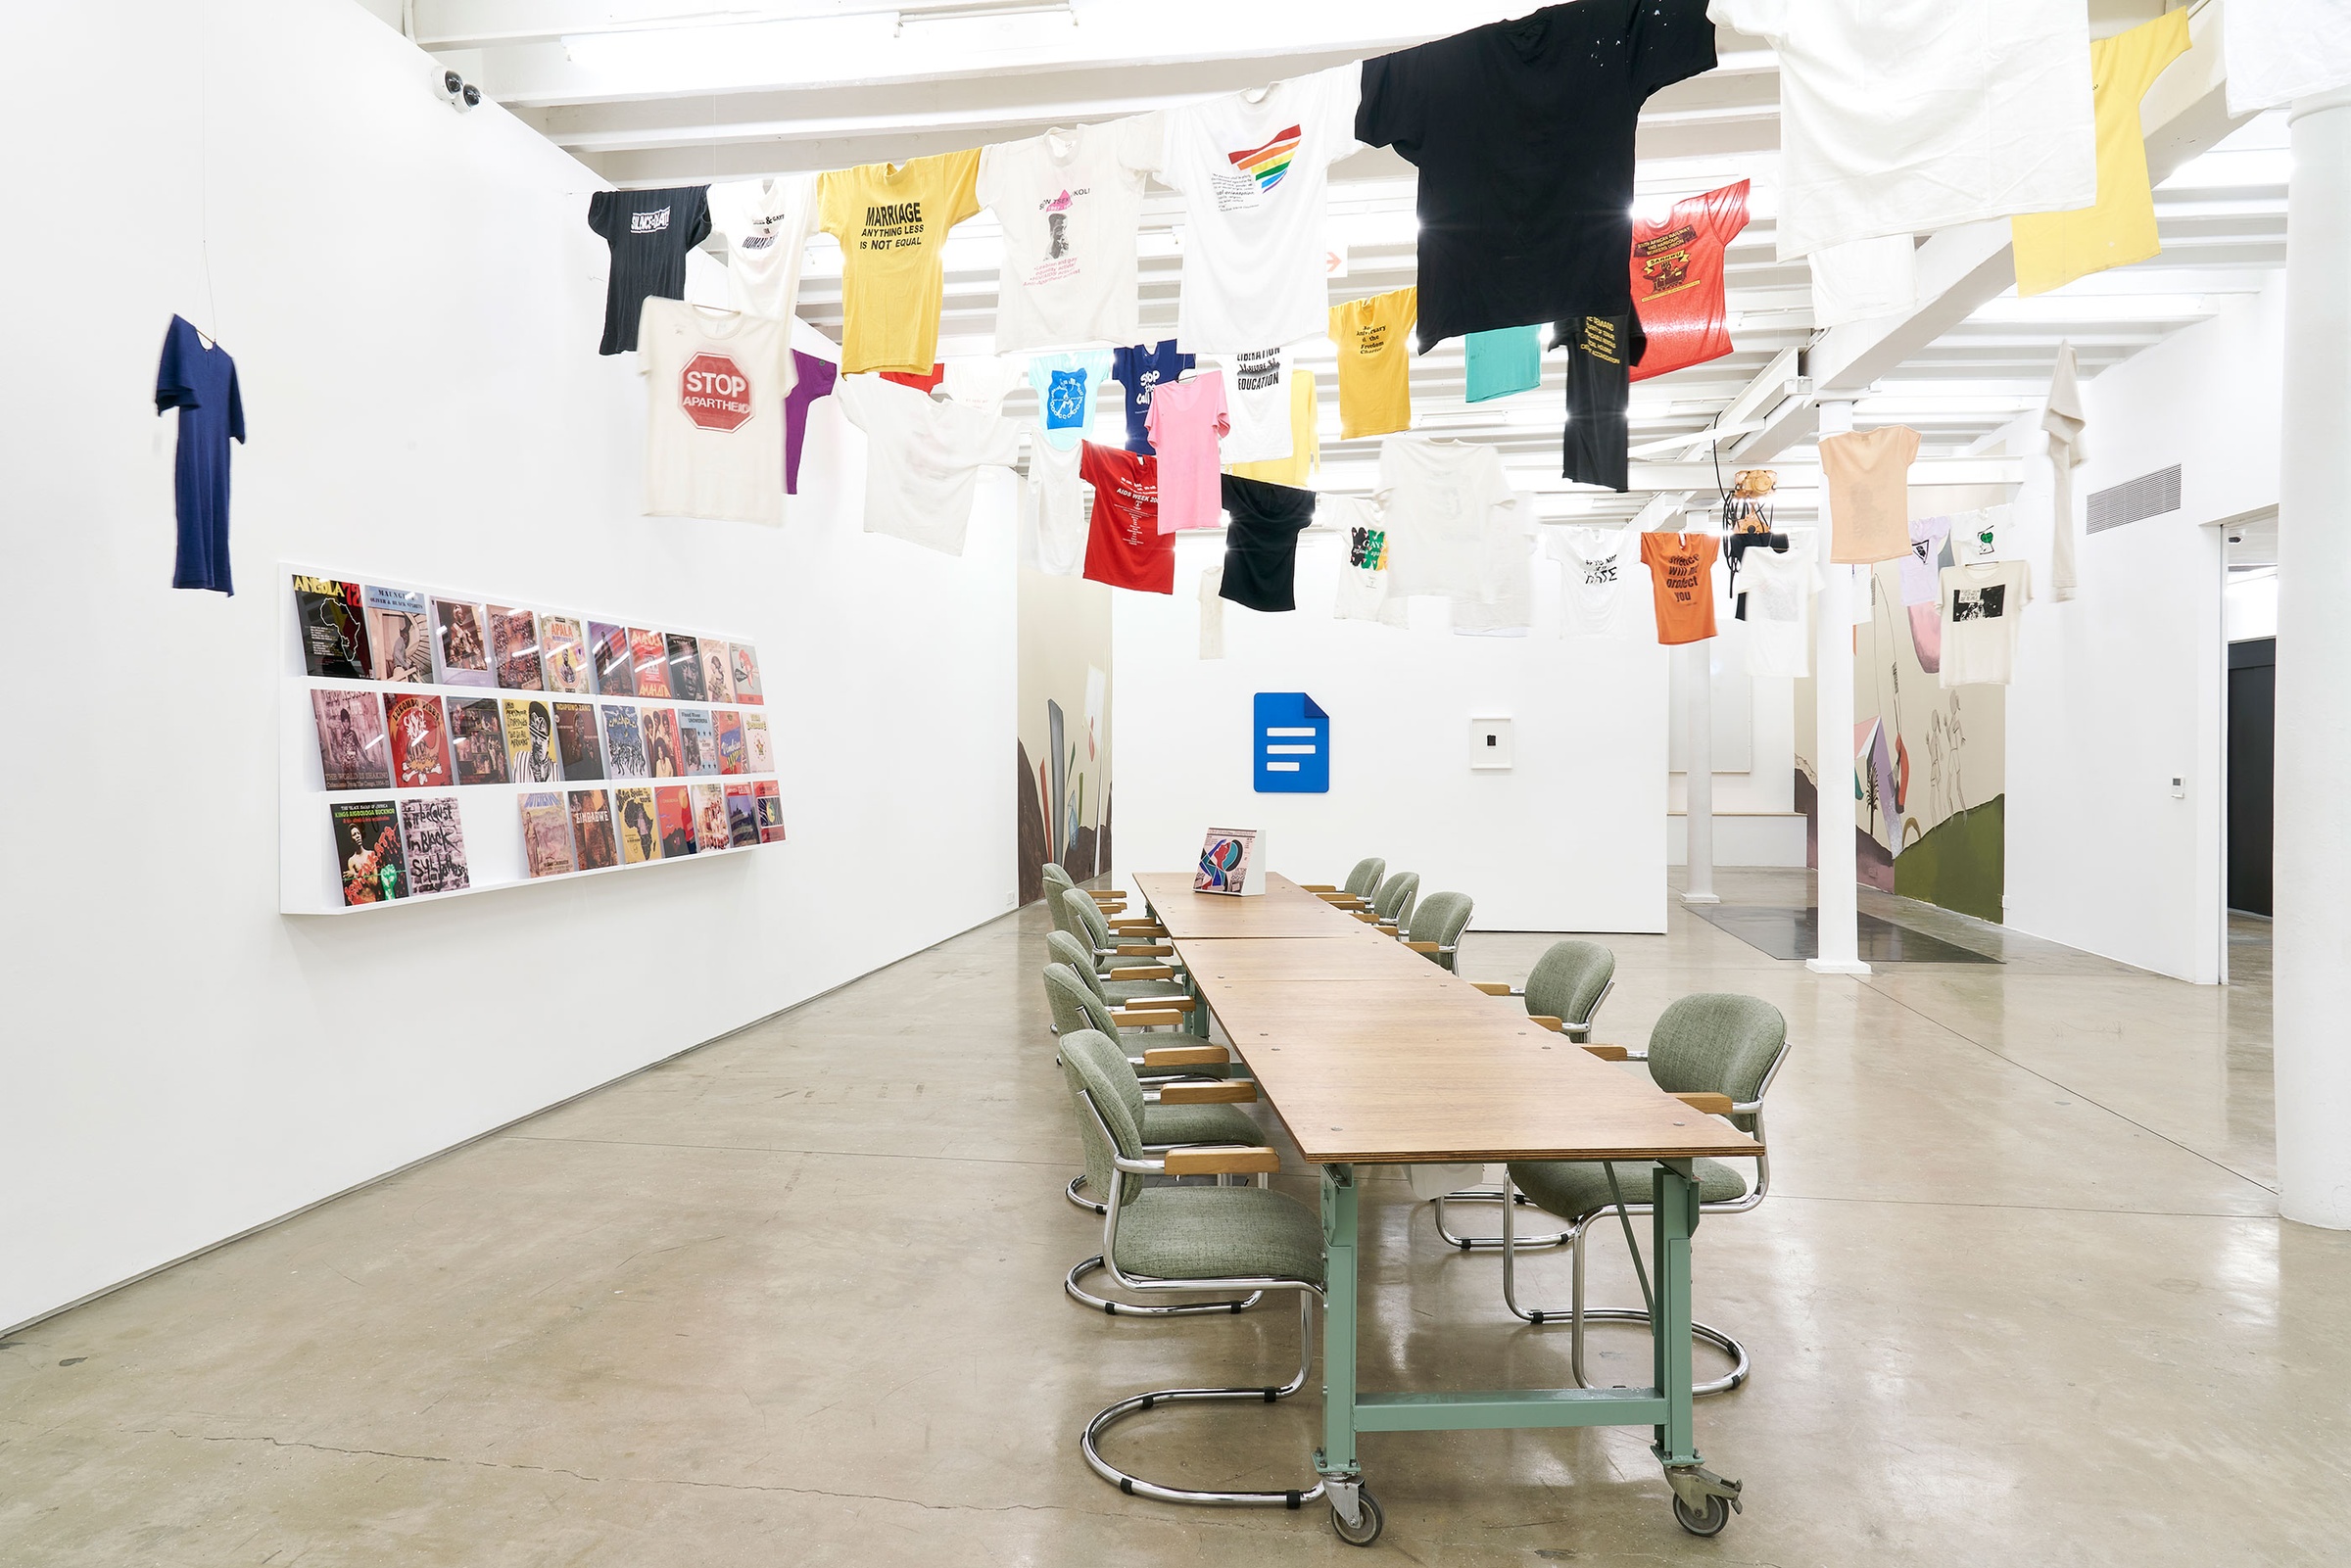 Installation photograph of the Common exhibition. On the left, vinyl record covers from ‘The Library of Things We Forgot to Remember’ by Kudzanai Chiurai are arranged on a slanted white shelf. In the middle is a long wooden table with an interactive box by Mitchell Messina. Above, T-shirts with slogans from the GALA Queer Archive and SAHA are suspended on criss-crossing lines.
